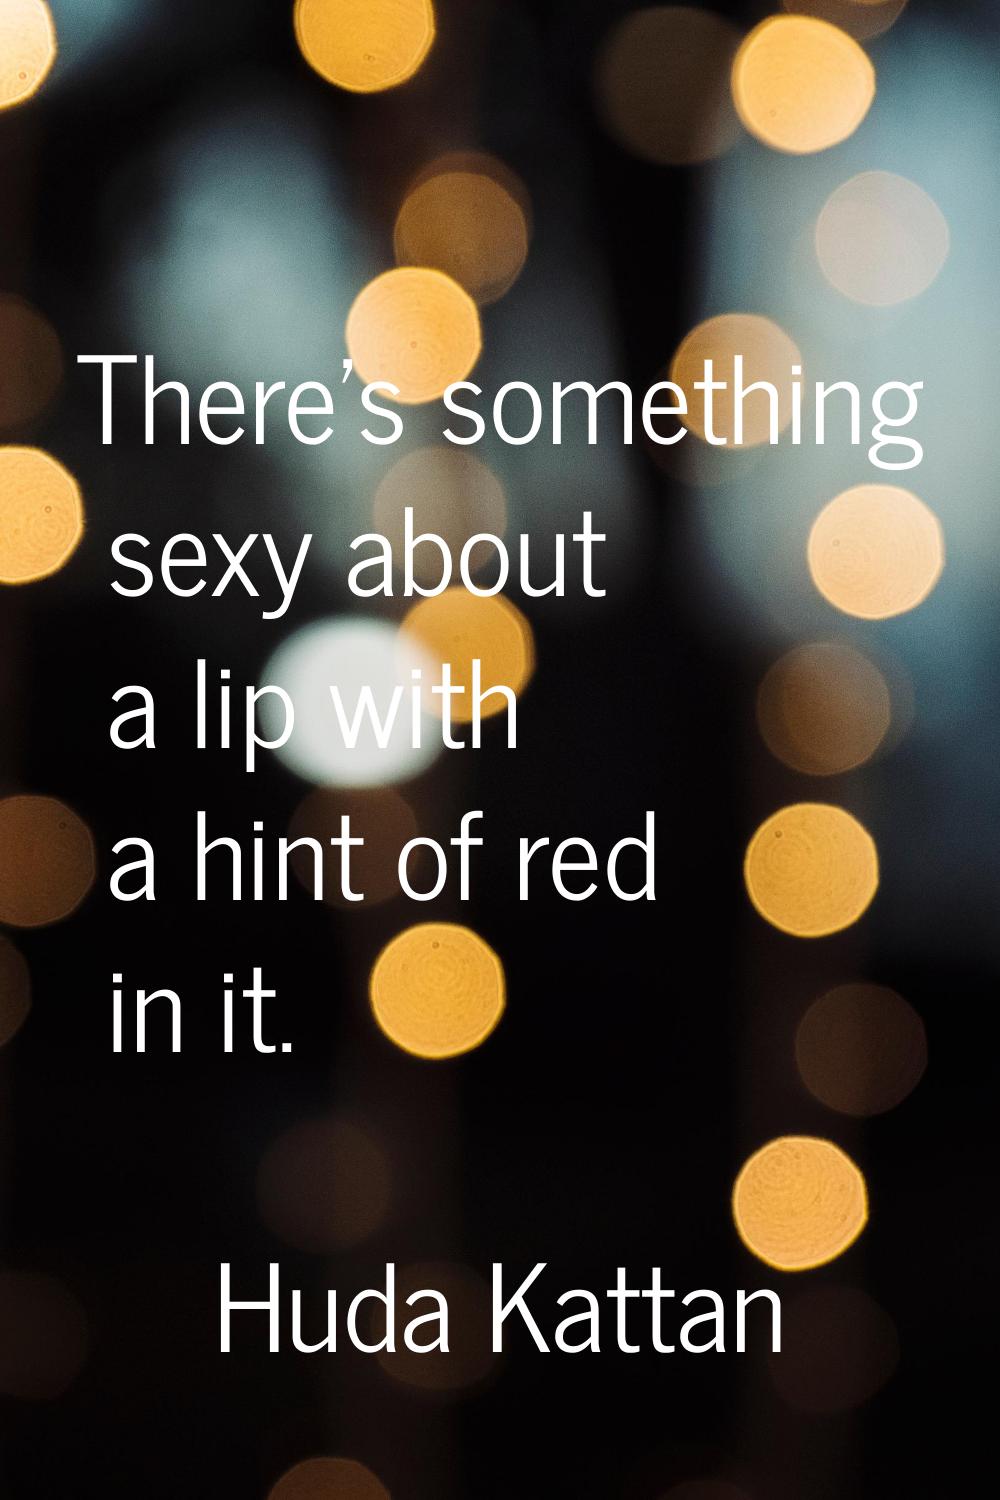 There's something sexy about a lip with a hint of red in it.